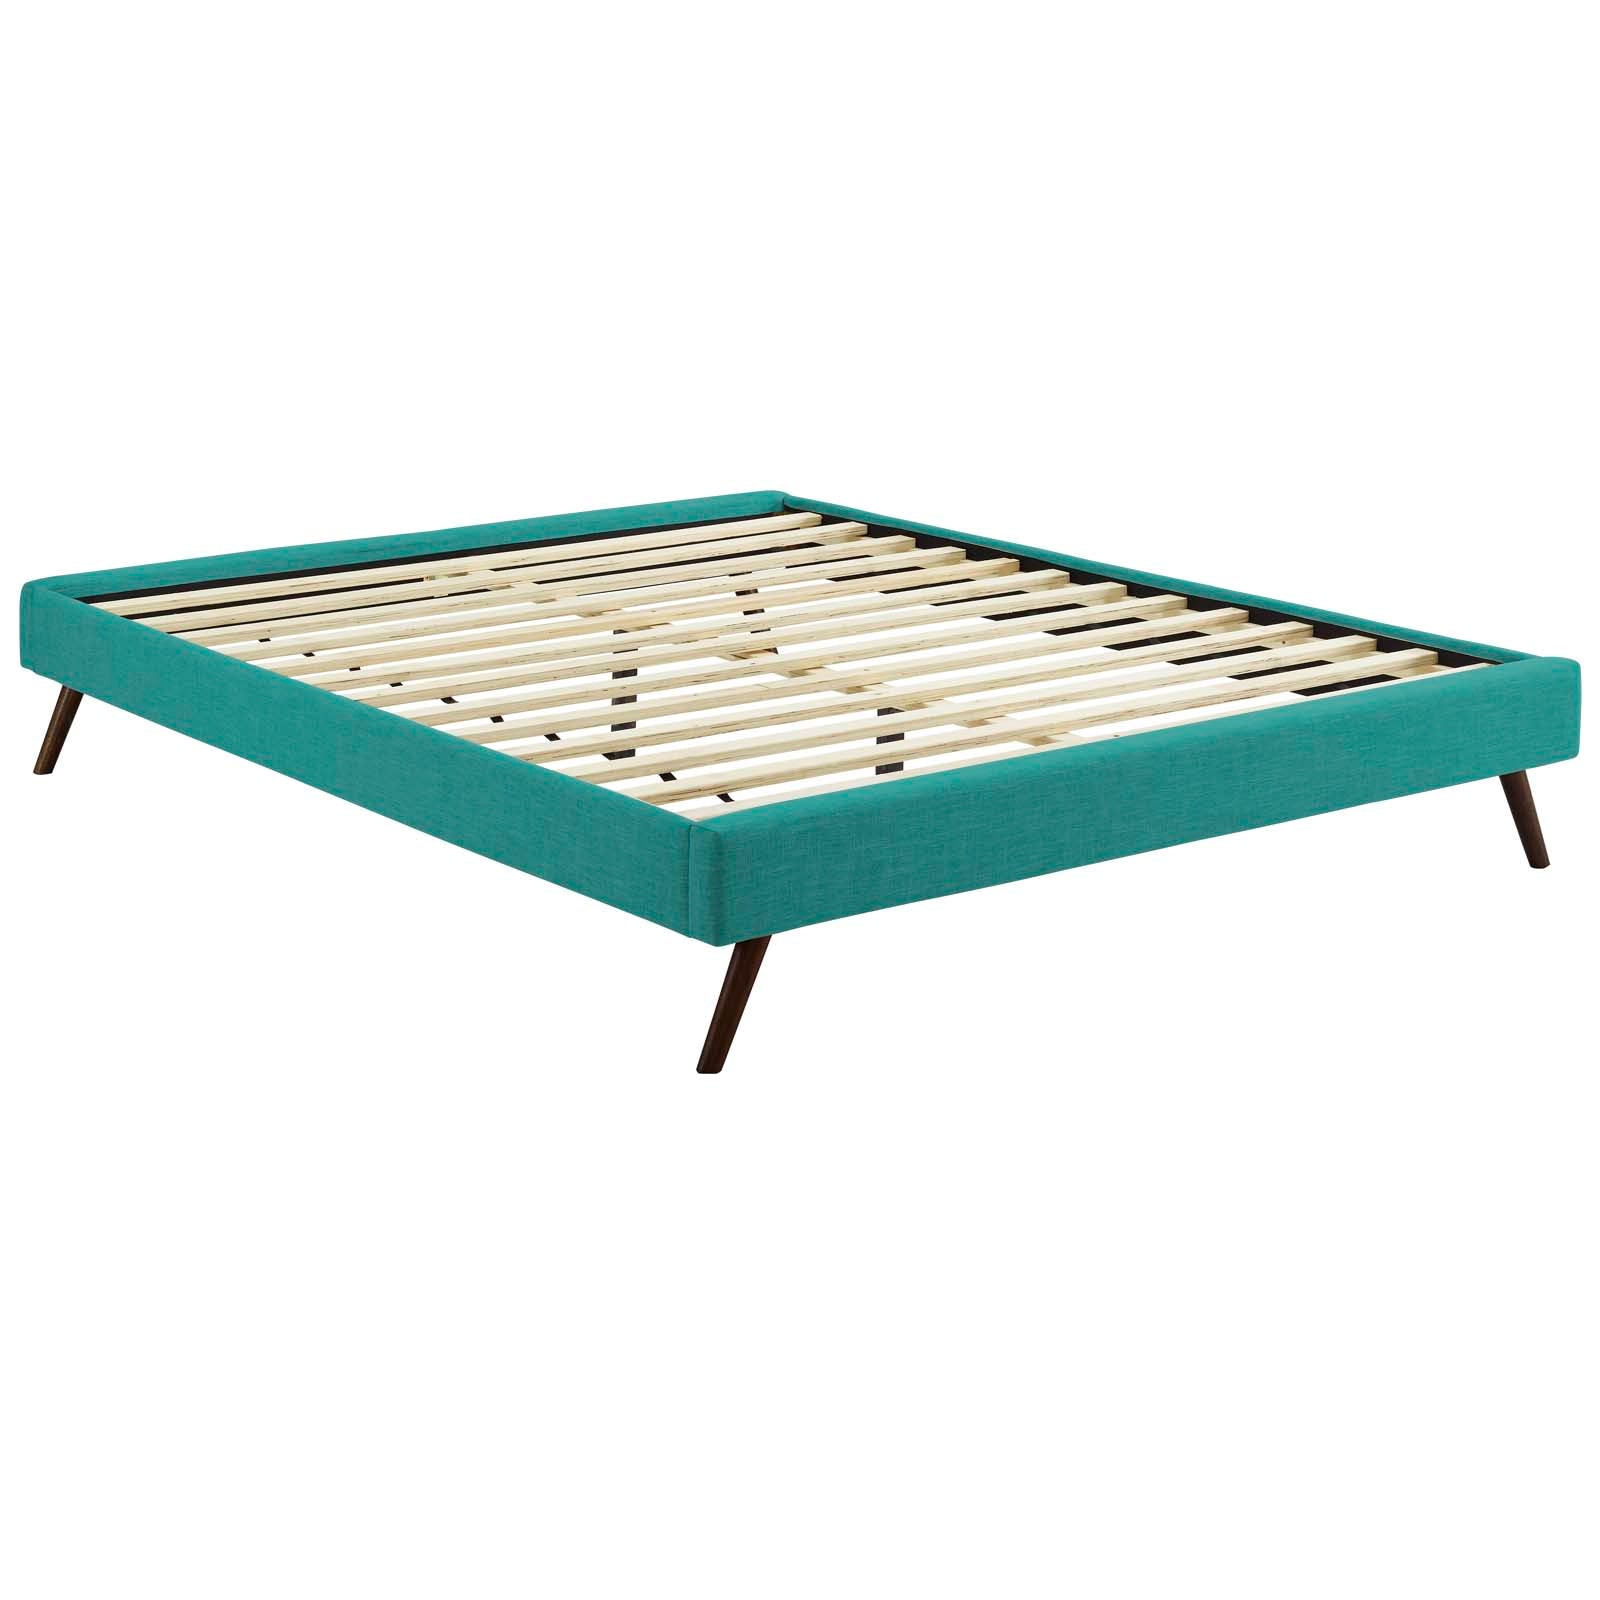 Modway Beds - Loryn Queen Fabric Bed Frame with Round Splayed Legs Teal